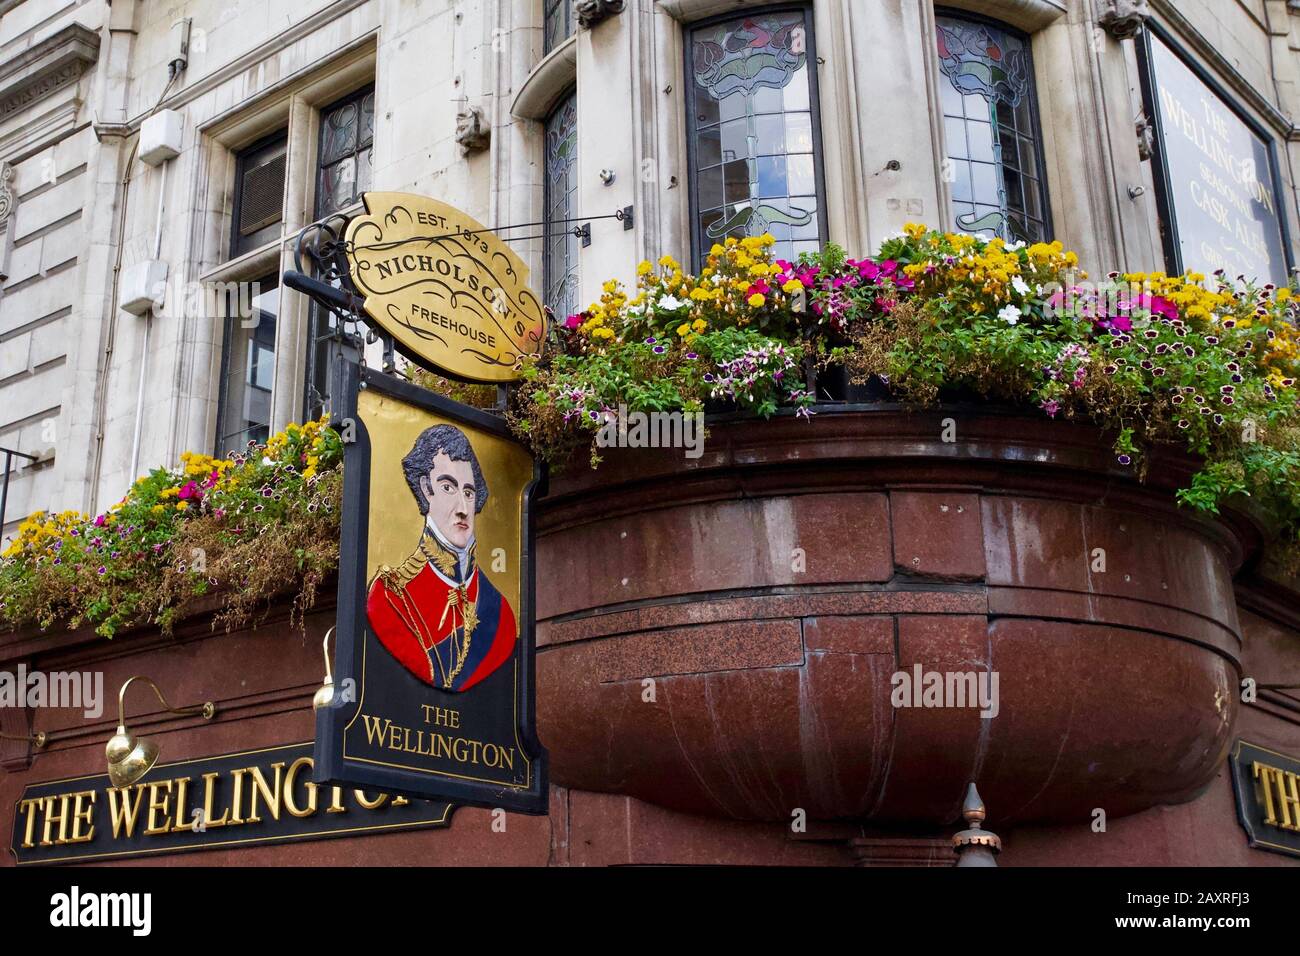 The Wellington, 351 Strand, Covent Garden, City Of Westminster, Londra, Inghilterra. Foto Stock